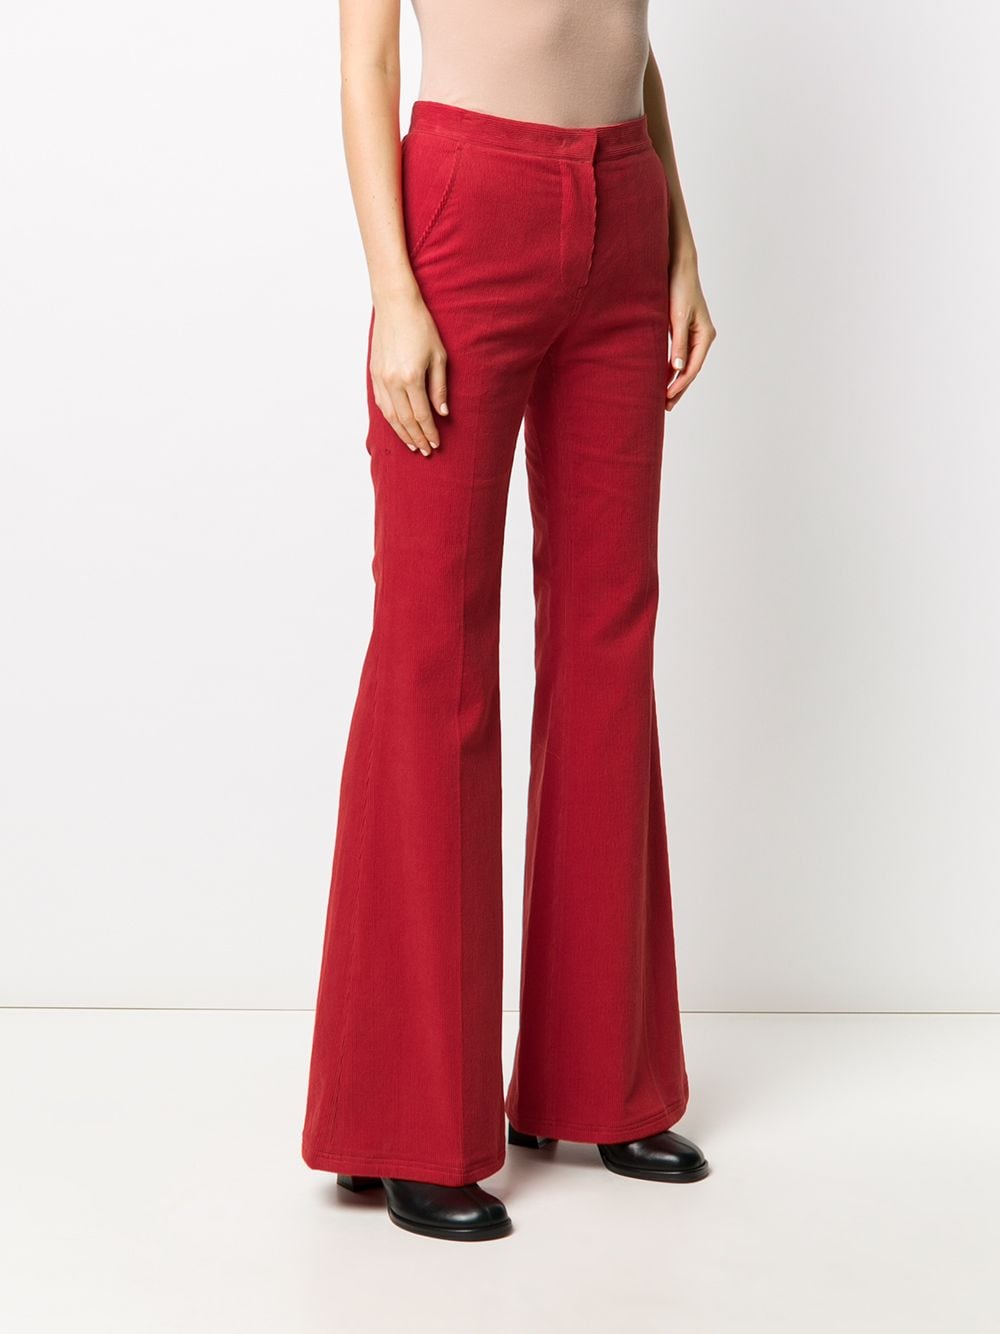 Shop pushBUTTON flared corduroy trousers with Express Delivery - FARFETCH